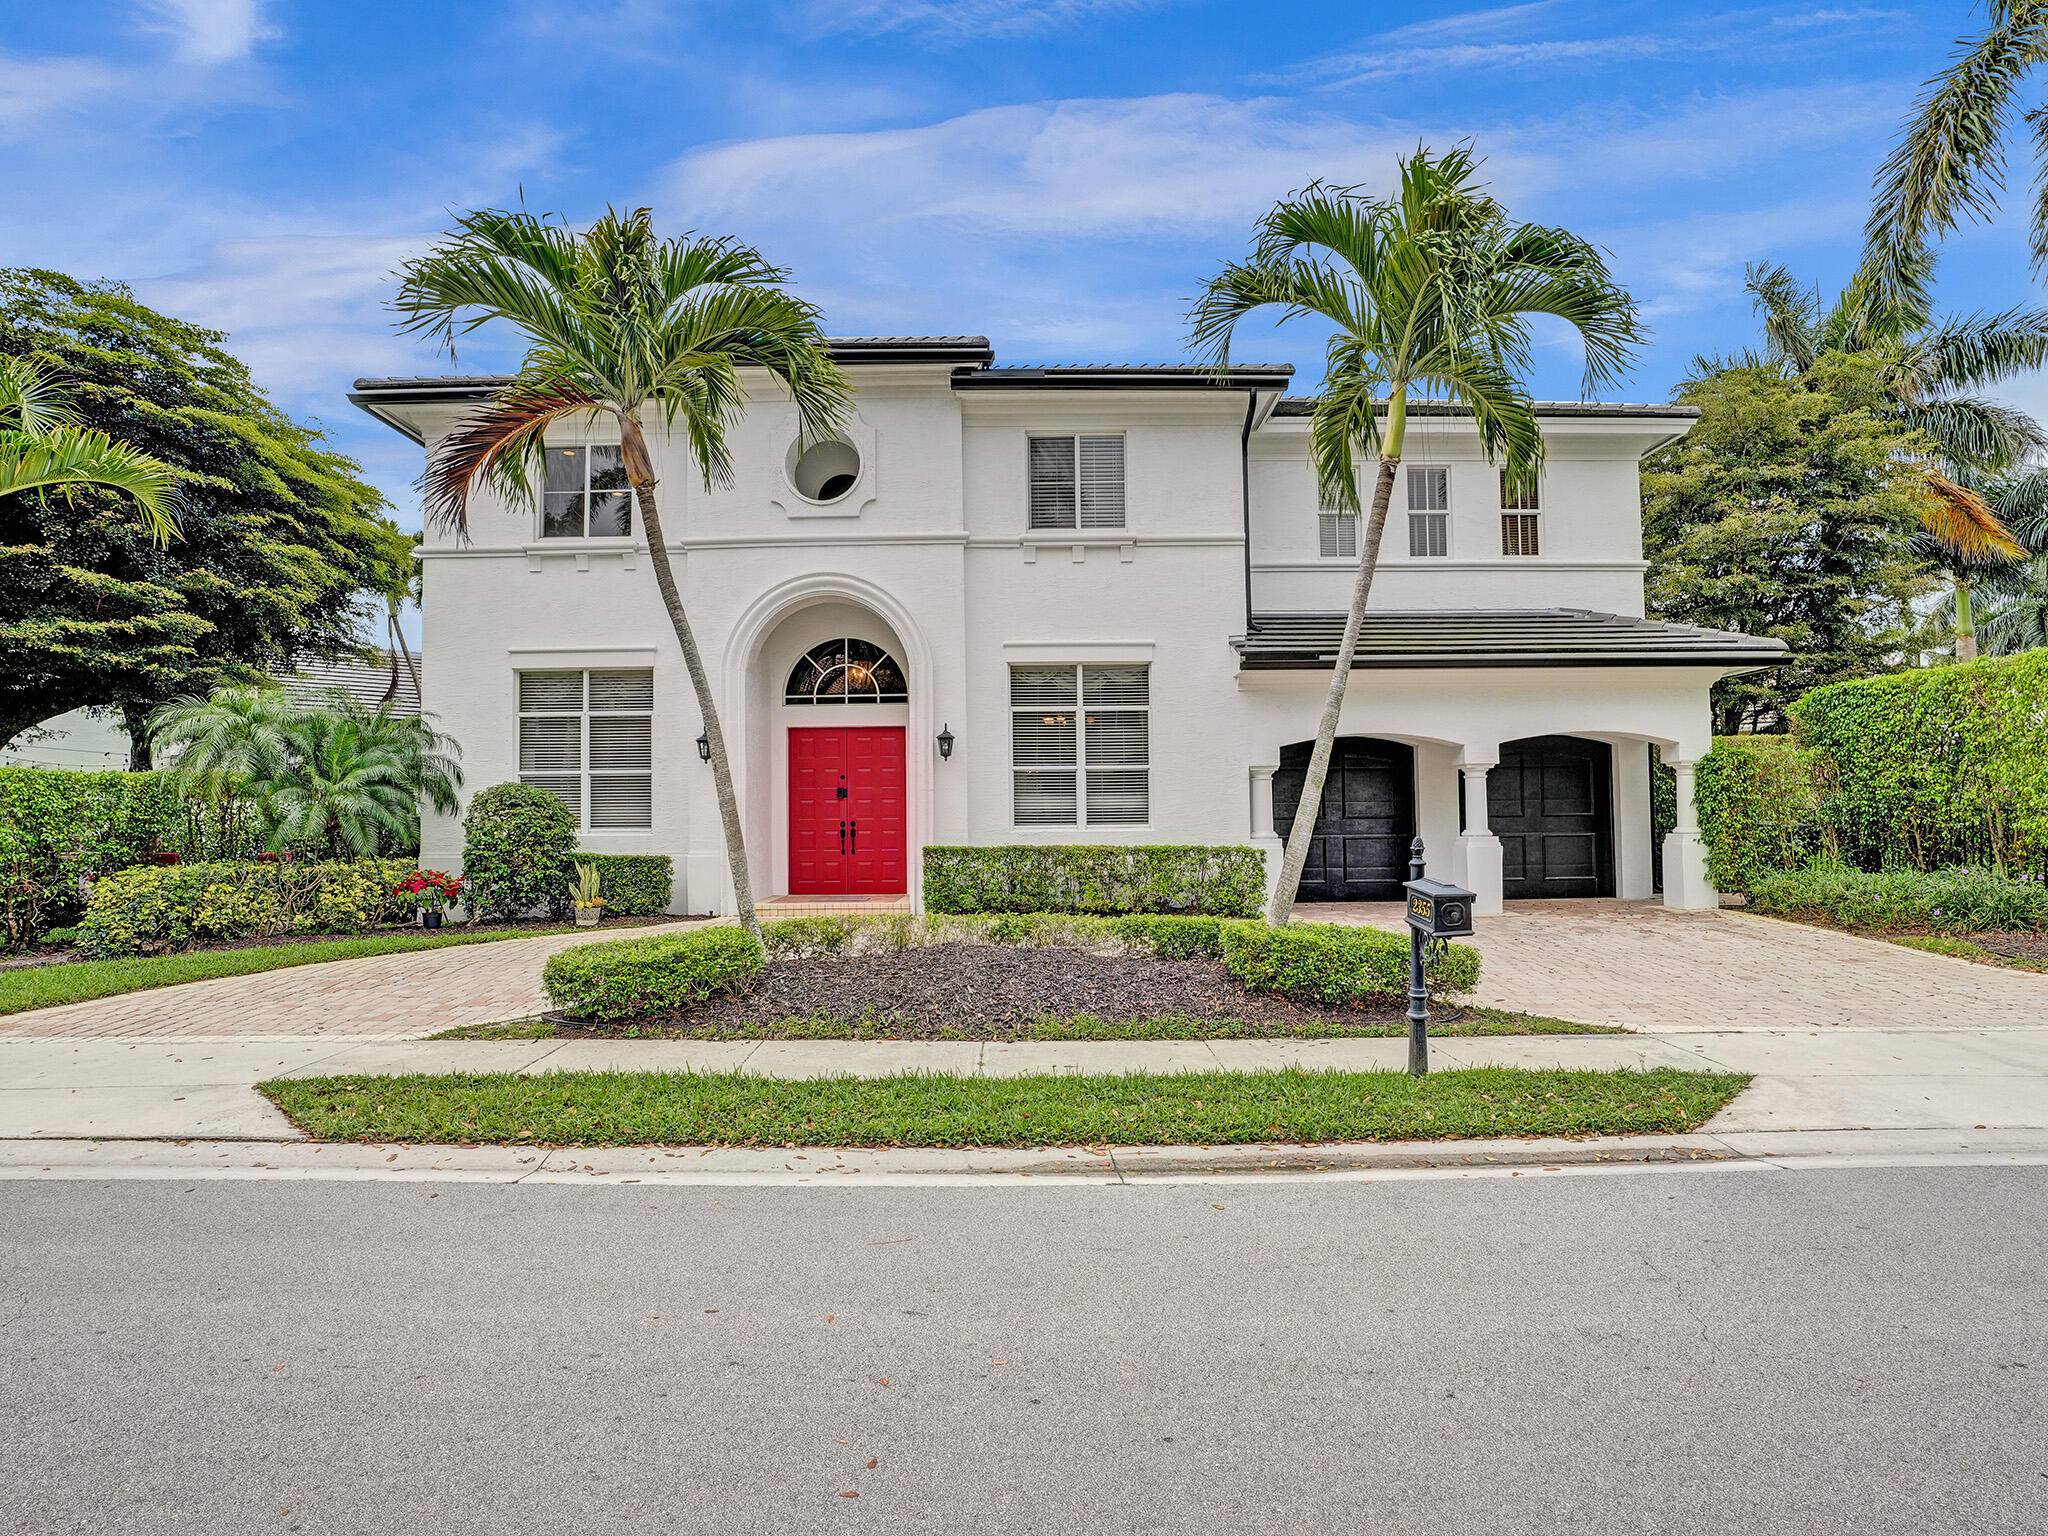 LOCATION LOCATION... THIS TOLL BROTHERS ESTATE HOME IS SITUATED ON ONE OF THE BEST INTERIOR LOTS IN THE PRESERVE.